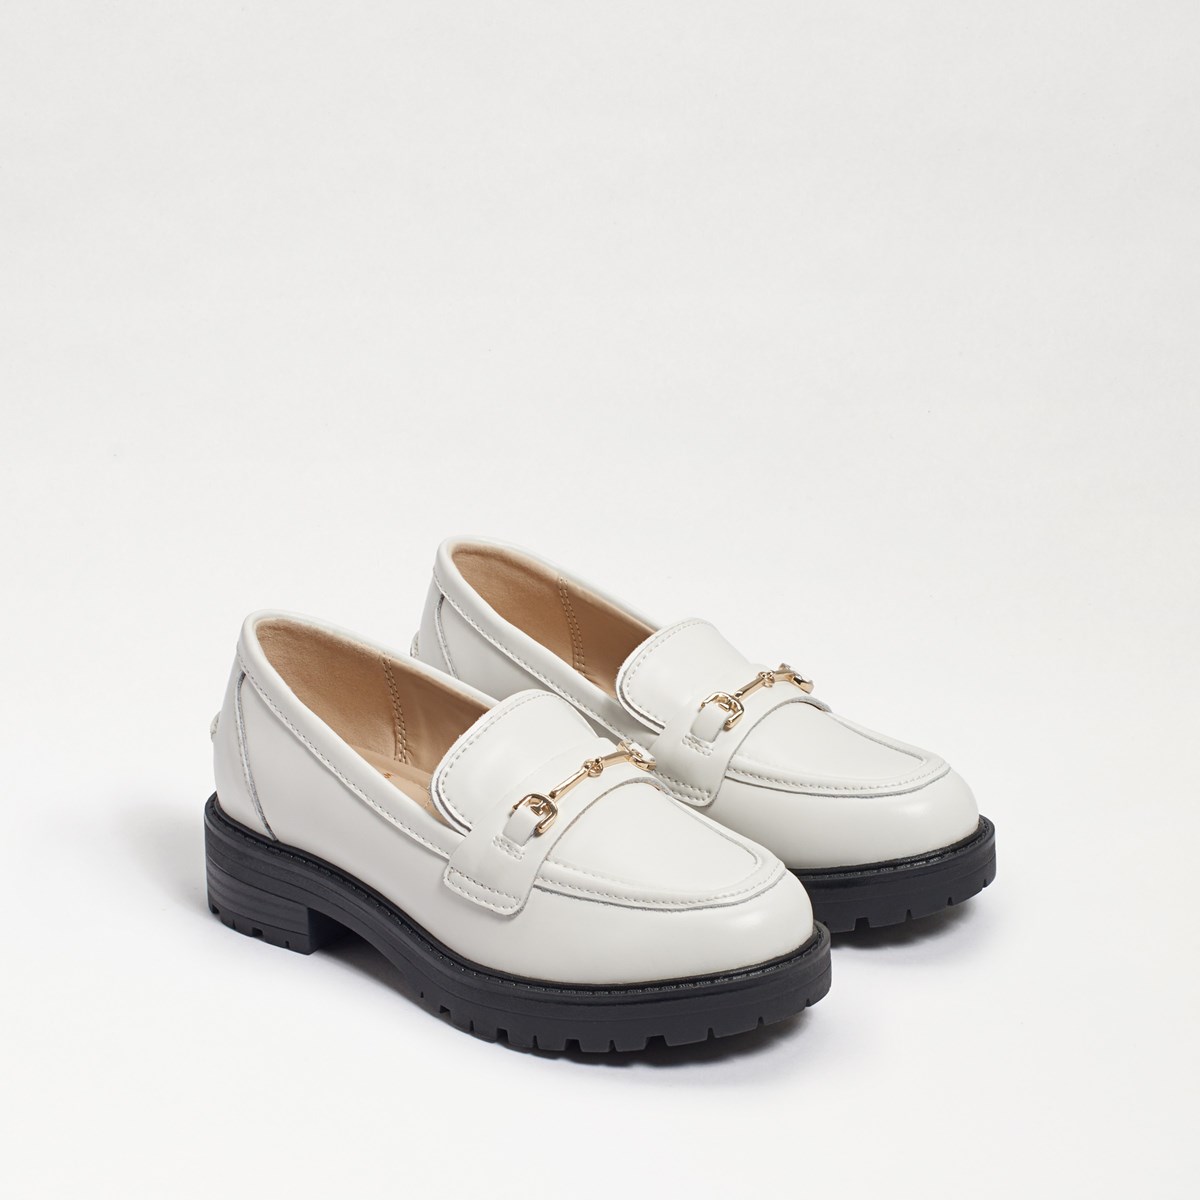 Tully Kids Loafer - Pair